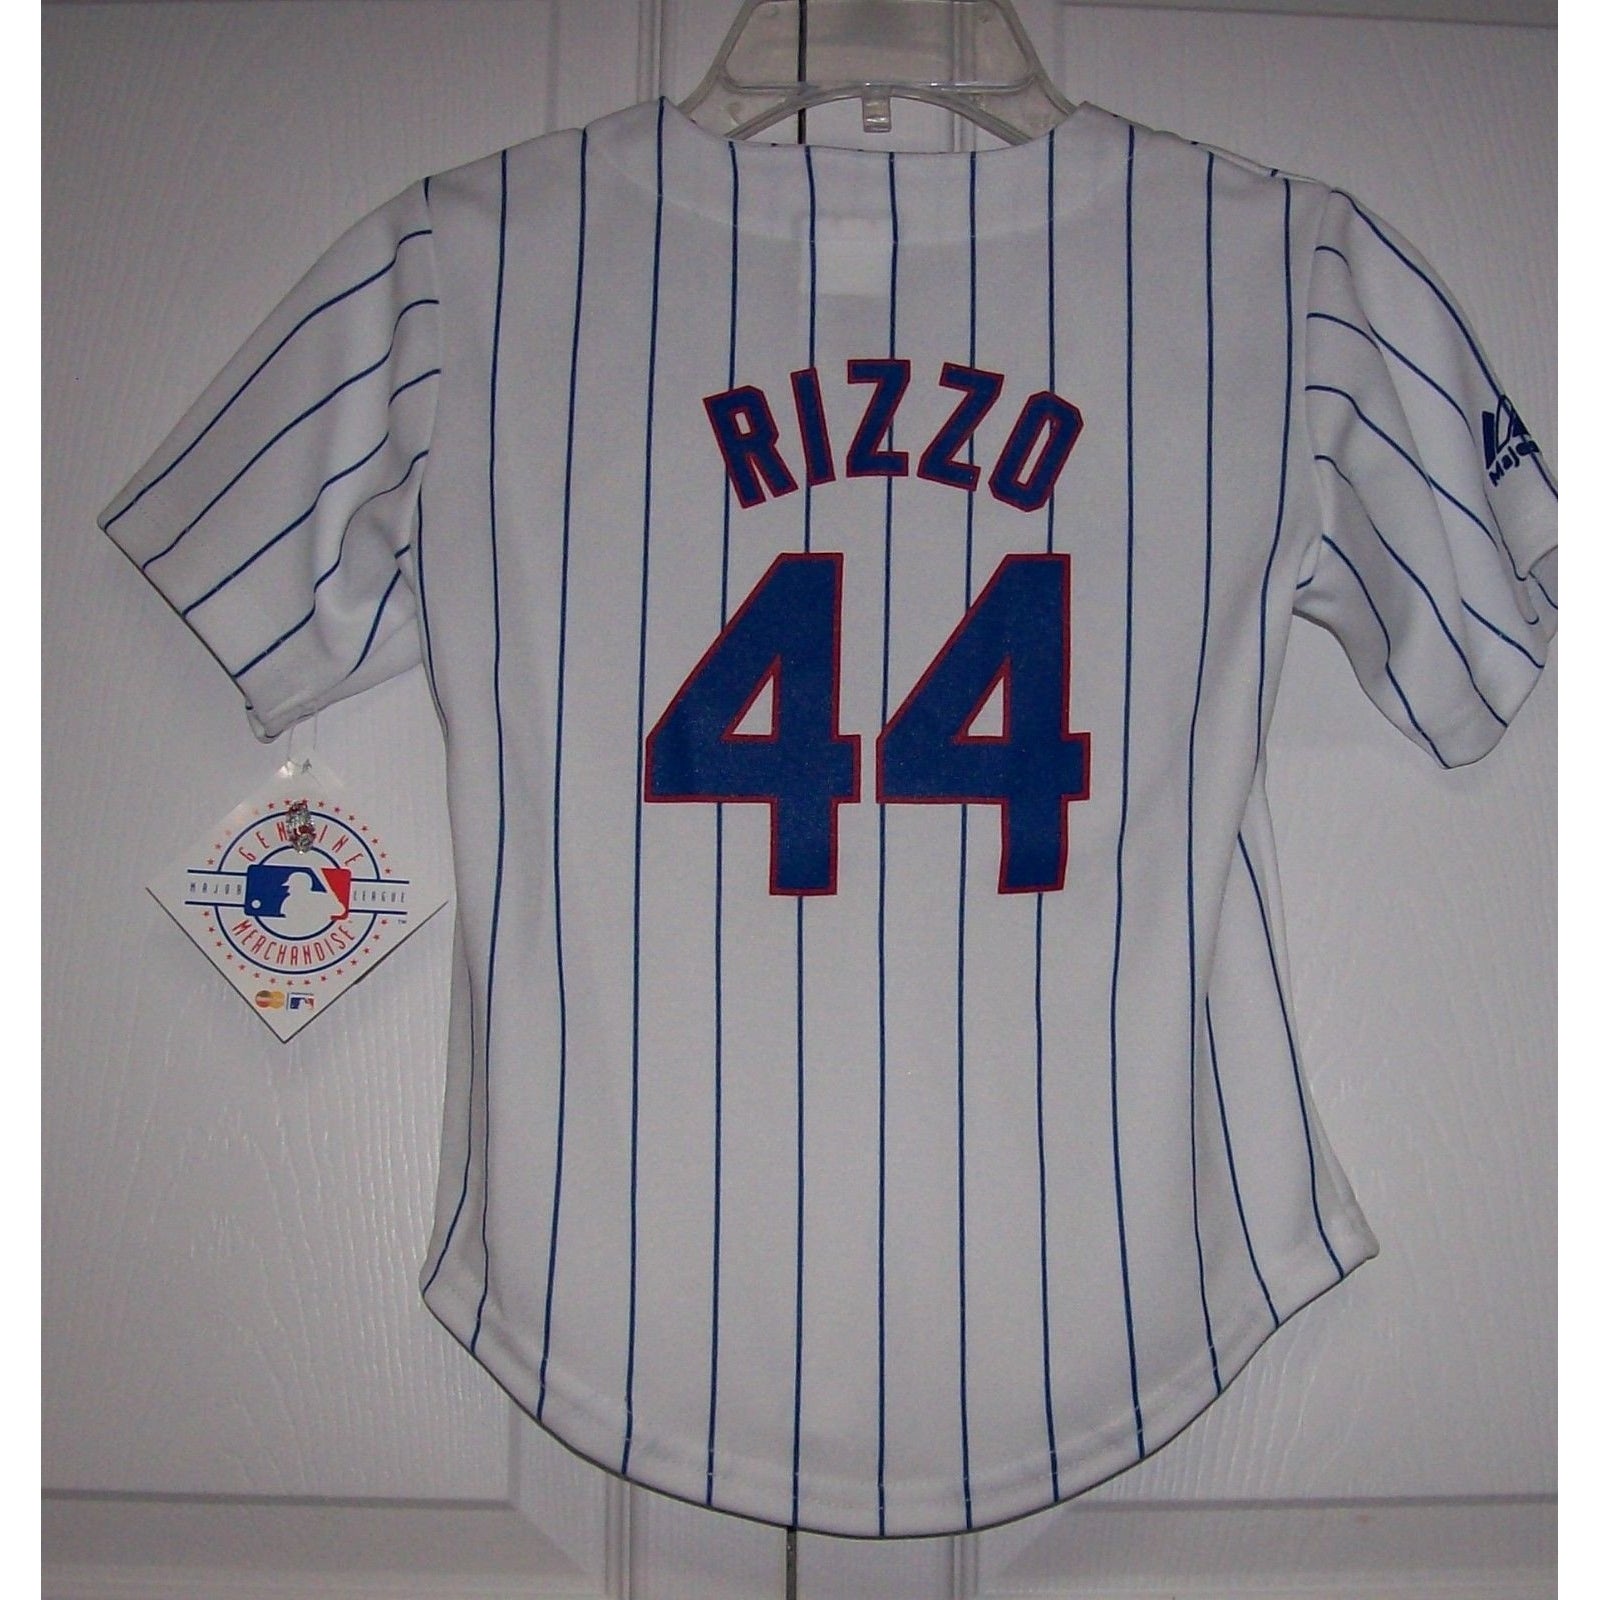 Men's Majestic Anthony Rizzo White/Royal Chicago Cubs Home Flex Base  Authentic Collection Jersey with 100 Years at Wrigley Field Commemorative  Patch